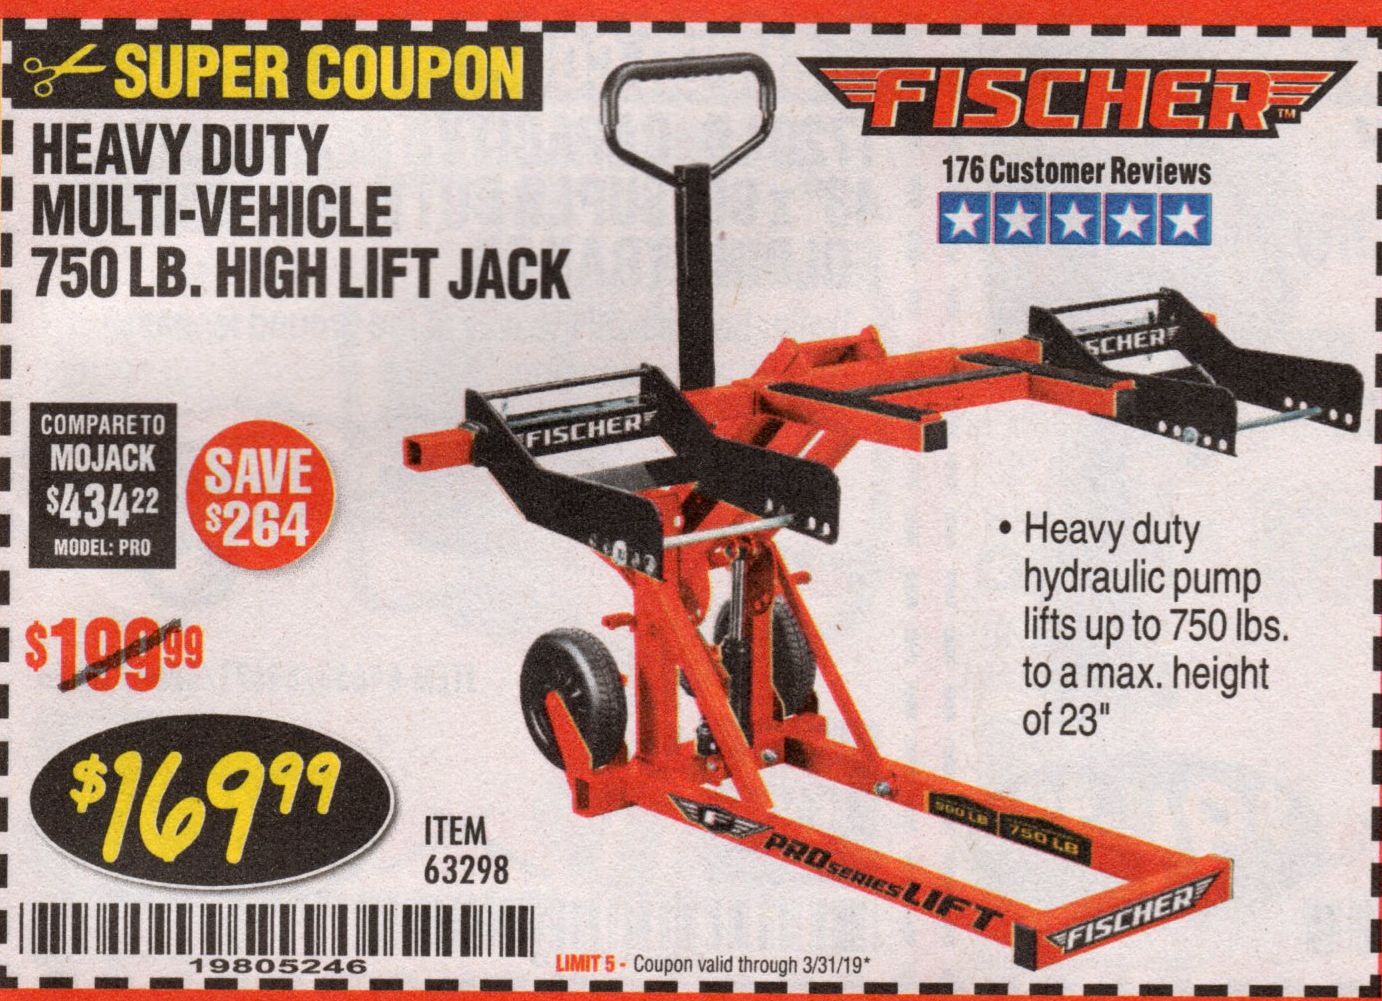 Harbor Freight Tools Coupon Database - Free coupons, 25 percent off coupons, toolbox coupons